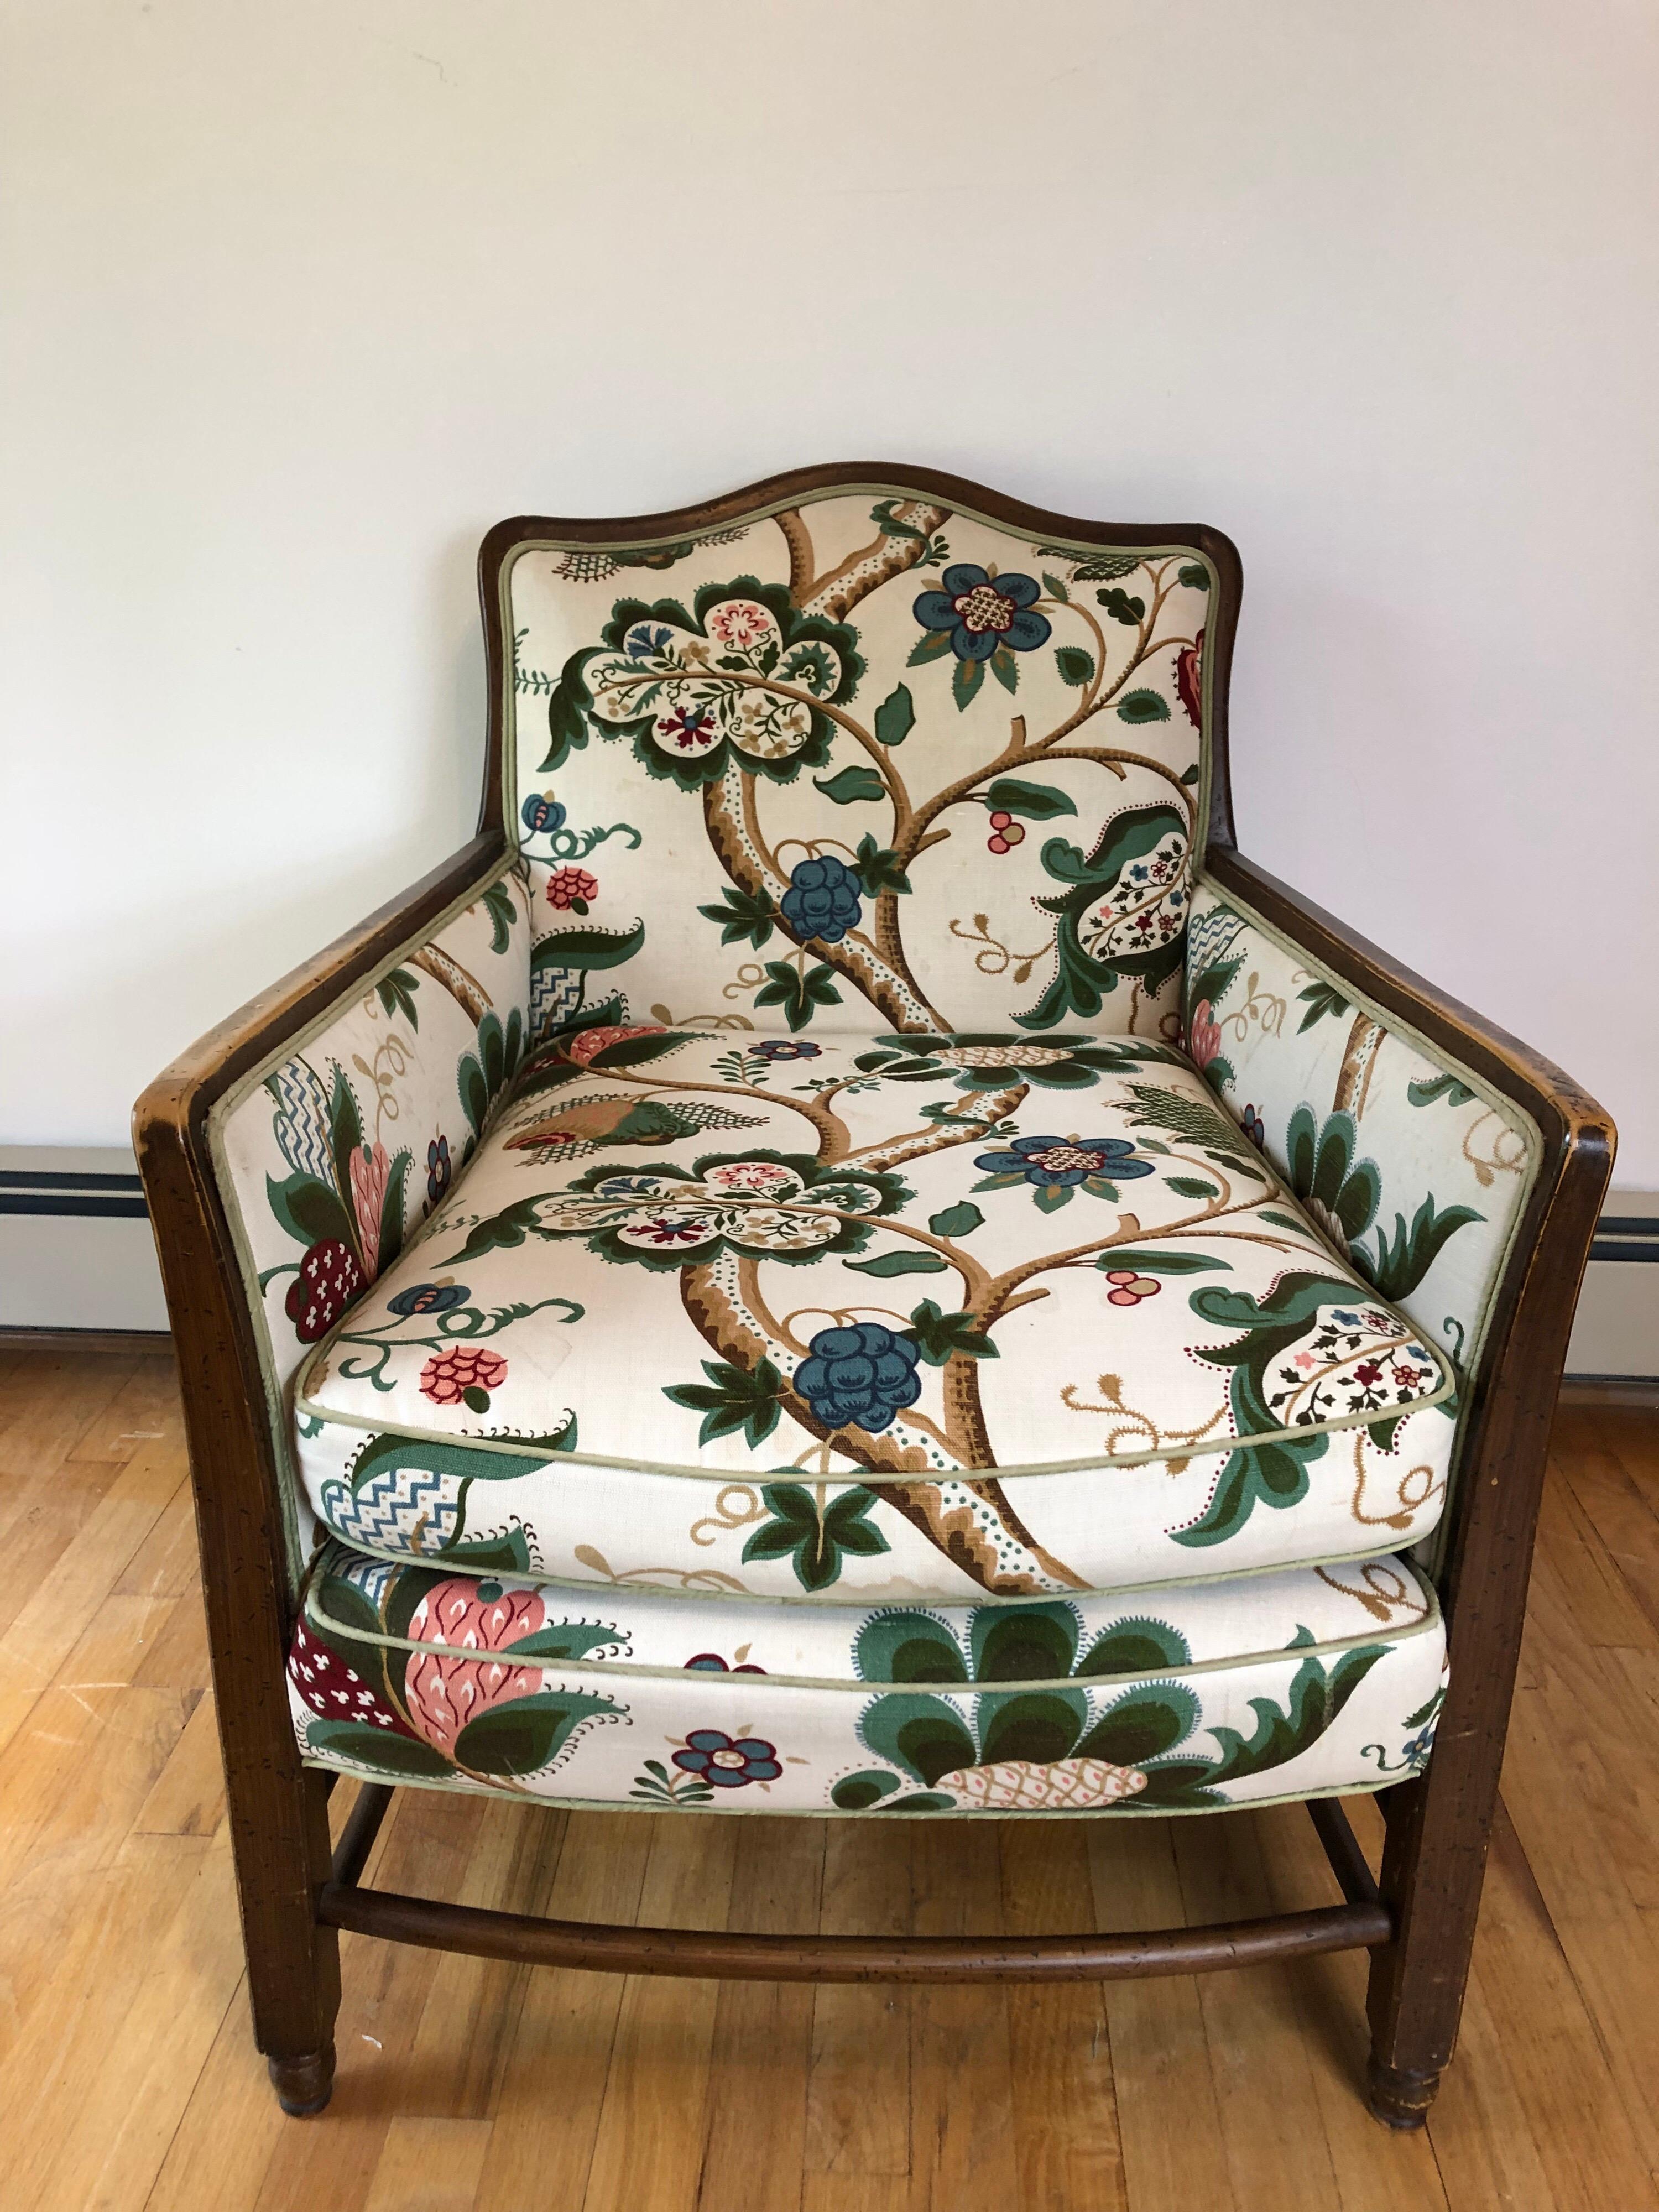 A French country style oak bergere chair. Stretcher base and ladder back. Floral printed cotton canvas upholstery is in excellent condition.